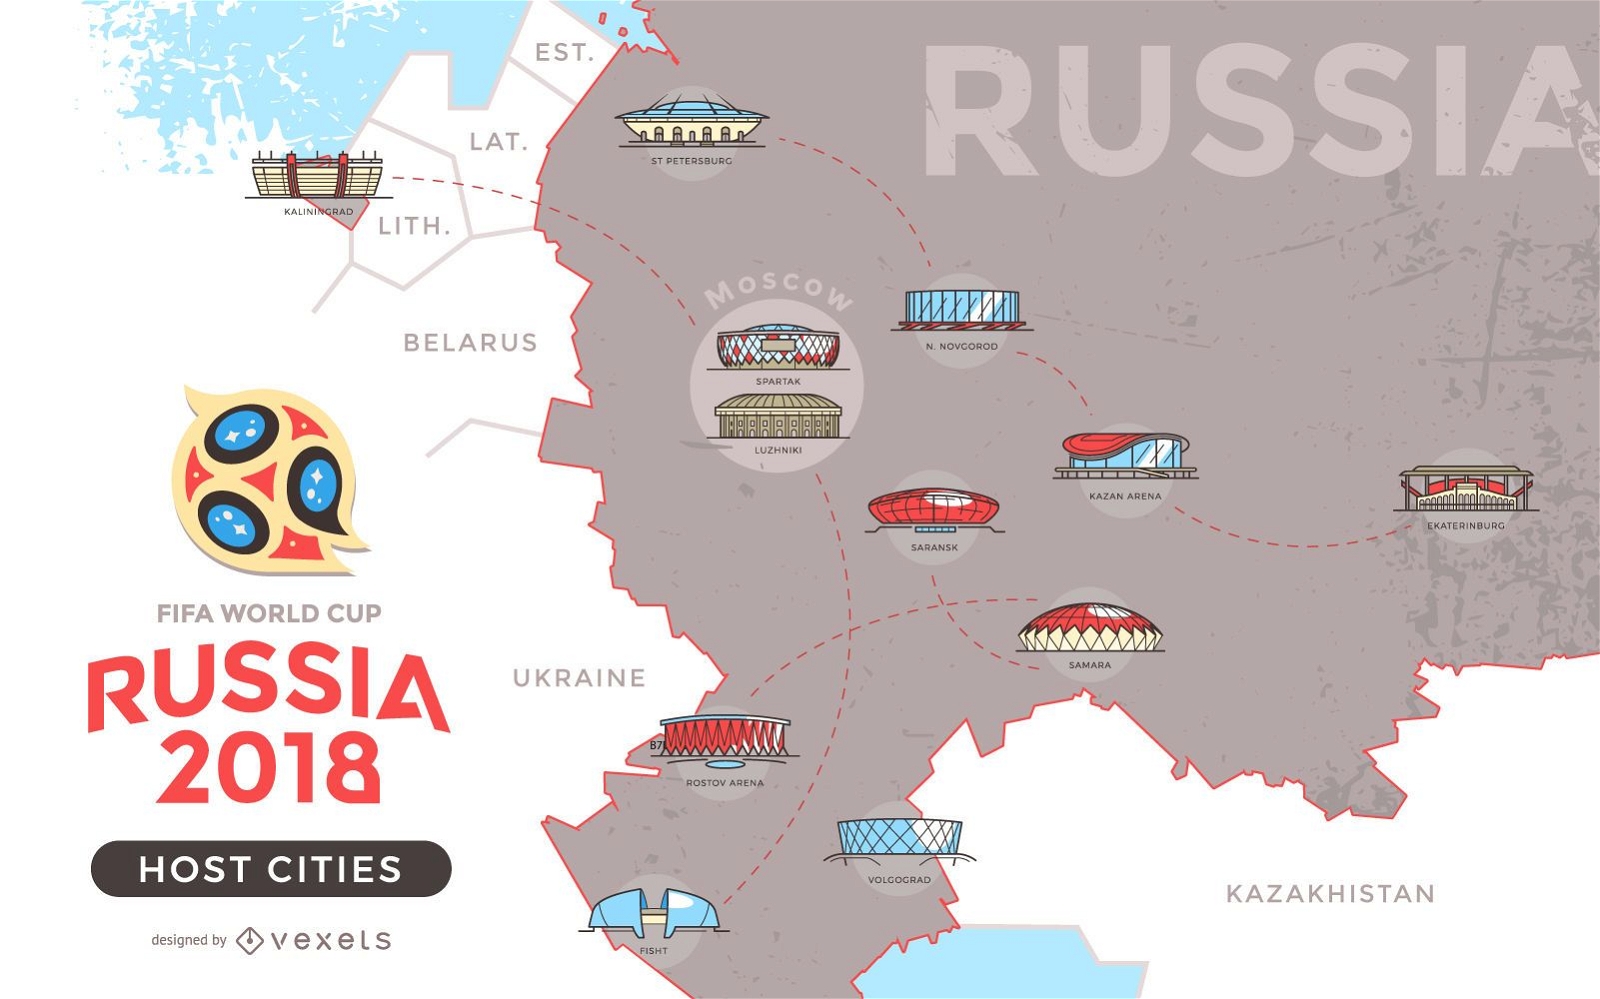 Russia 2018 host cities map